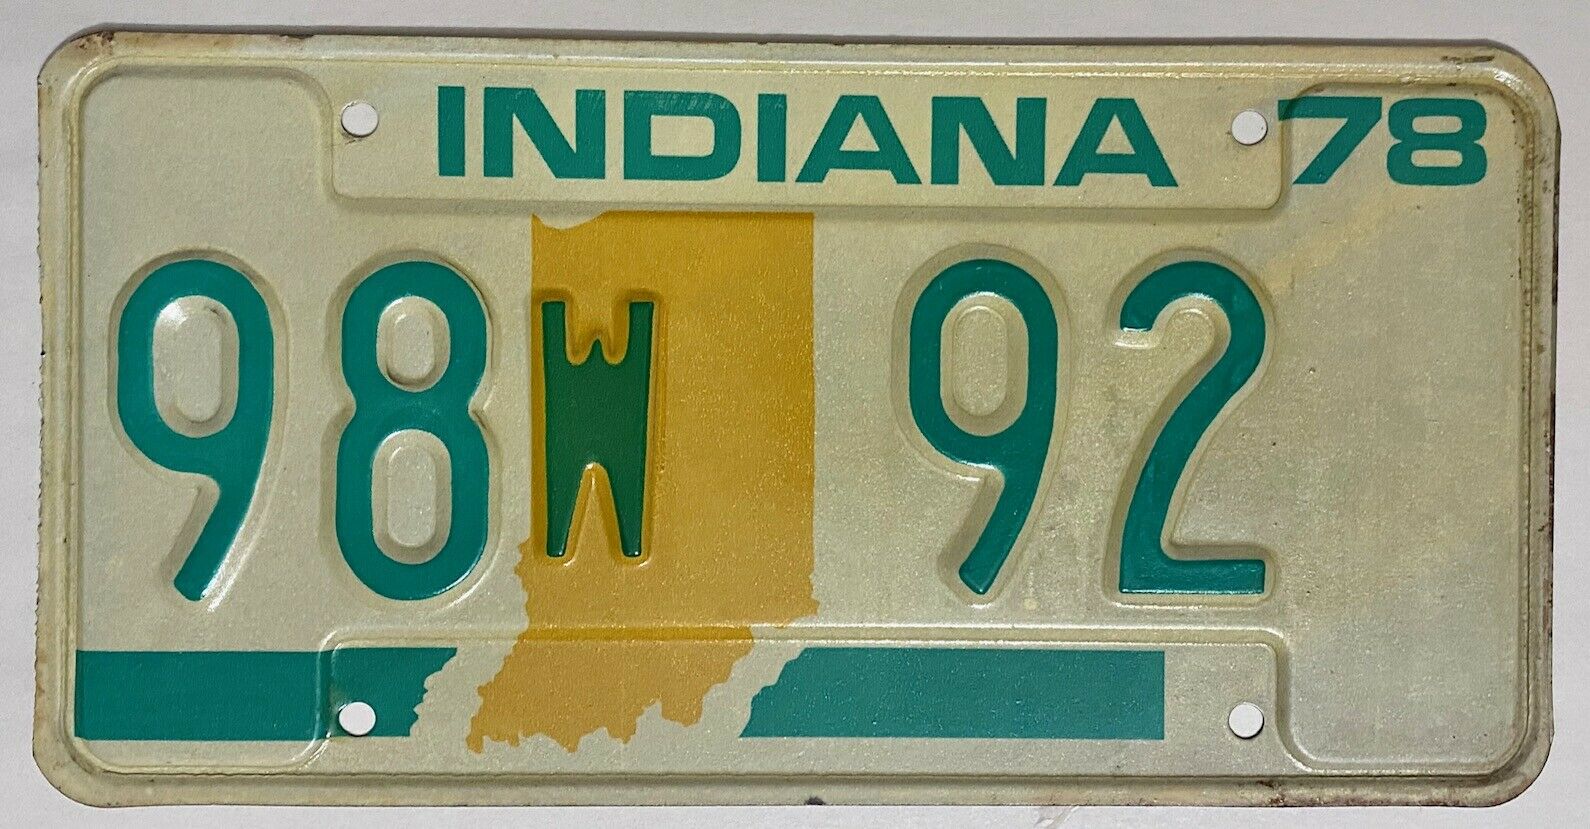 1978 INDIANA License Plate - IN #98W92